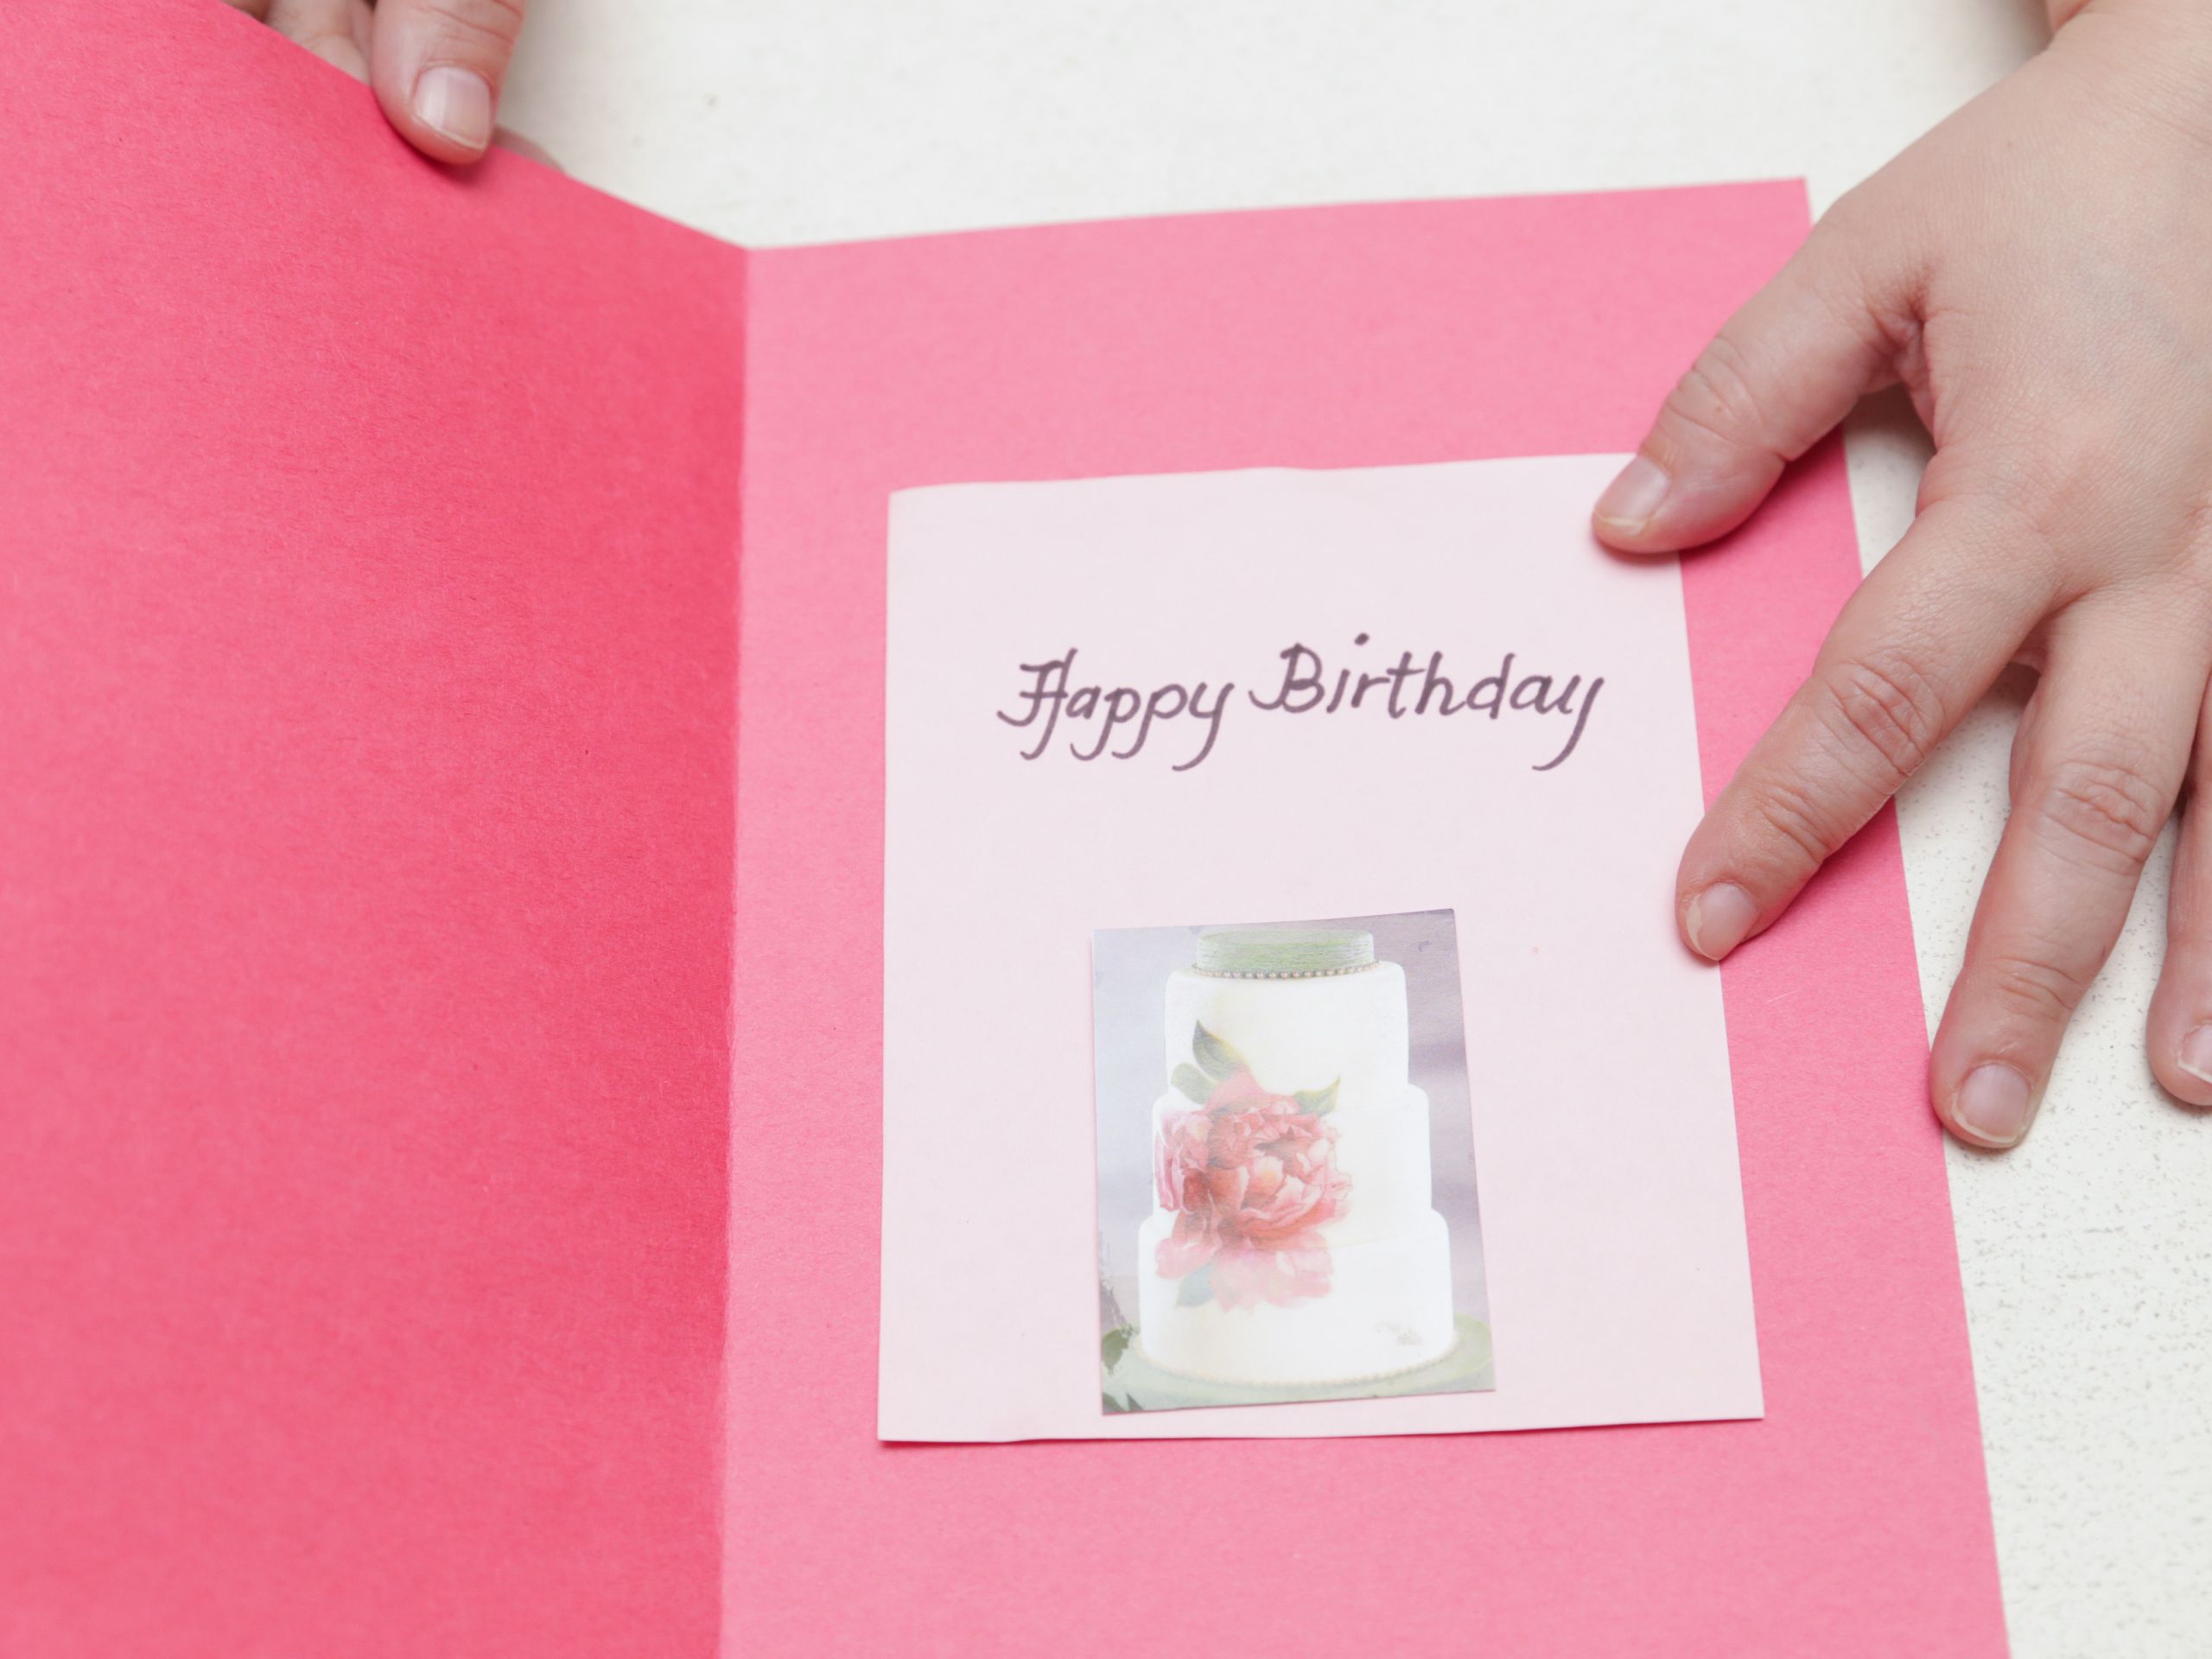 How To Make Birthday Cards
 4 Ways to Make a Simple Birthday Card at Home wikiHow